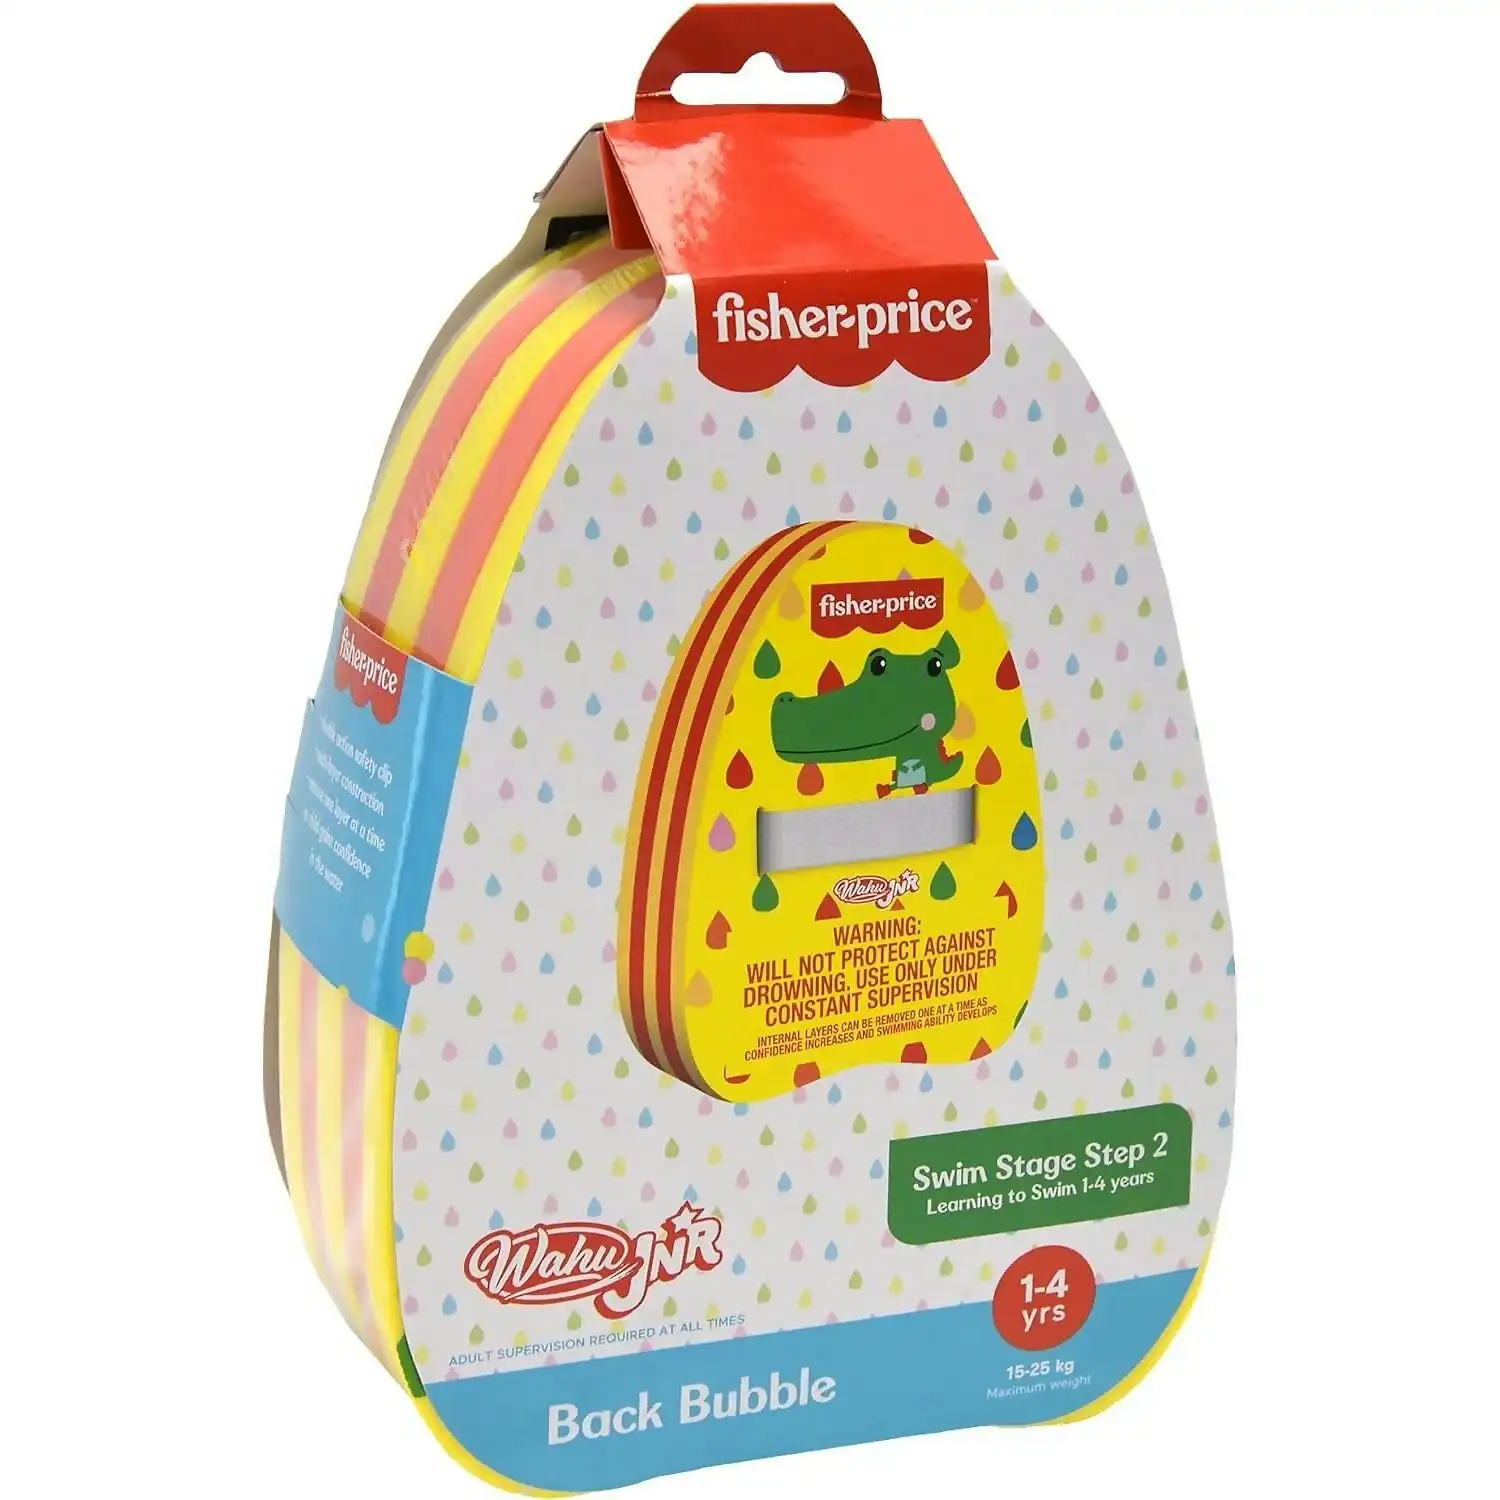 Fisher-price - Wahu Jnr Back Bubble Fisher-price